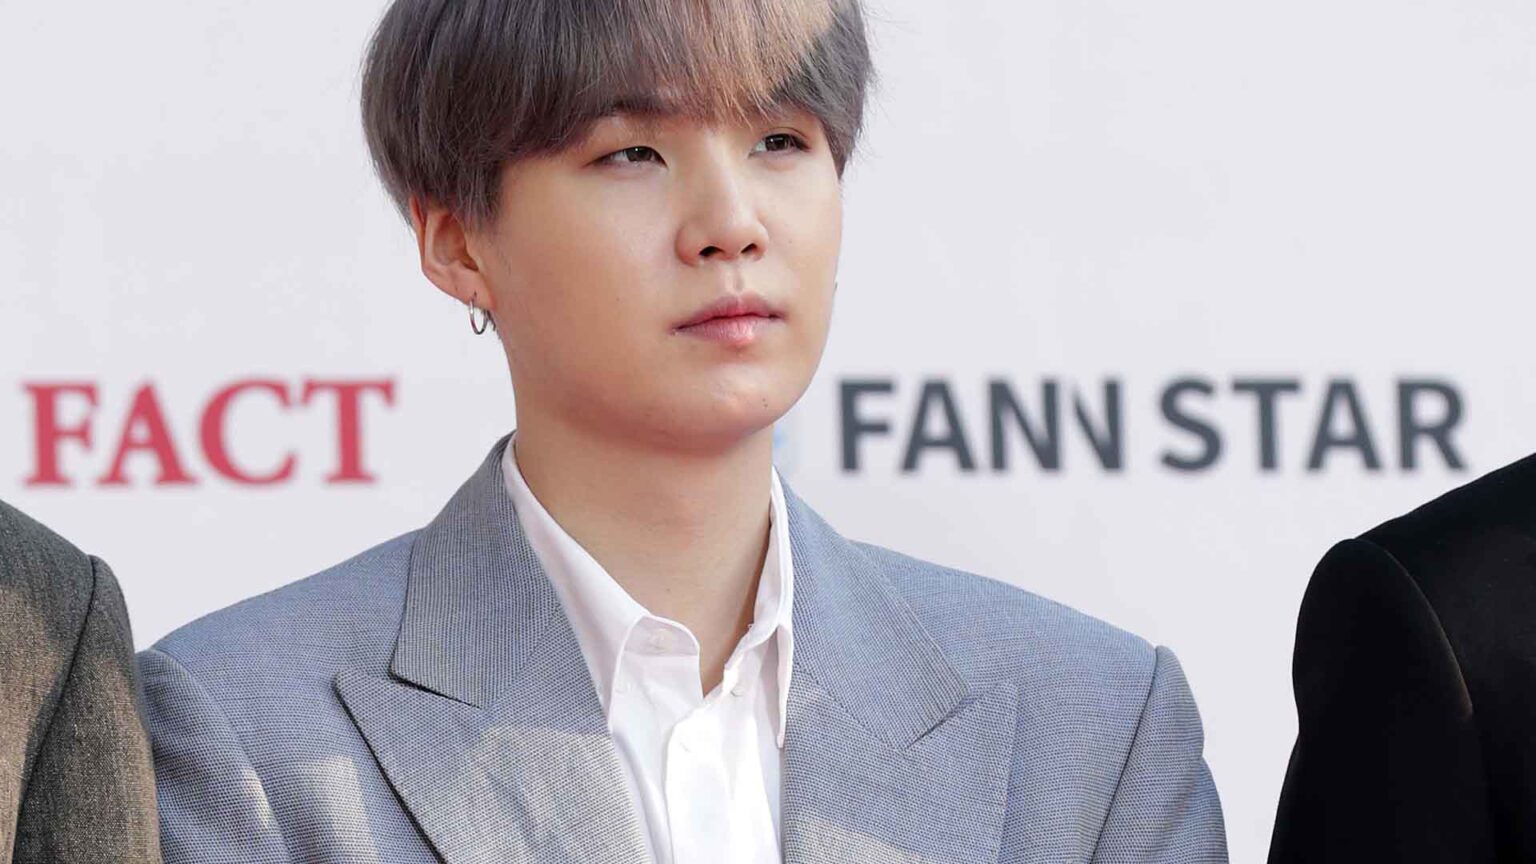 Are you Suga's biggest fan? Test your knowledge about the BTS band member with our fun trivia quiz!